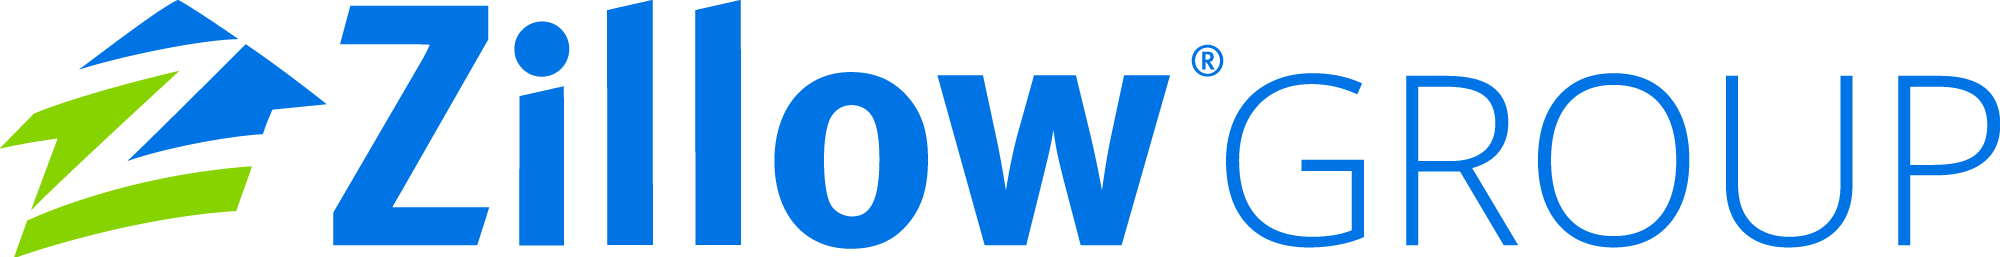 ZillowGroup-RGB (1).png